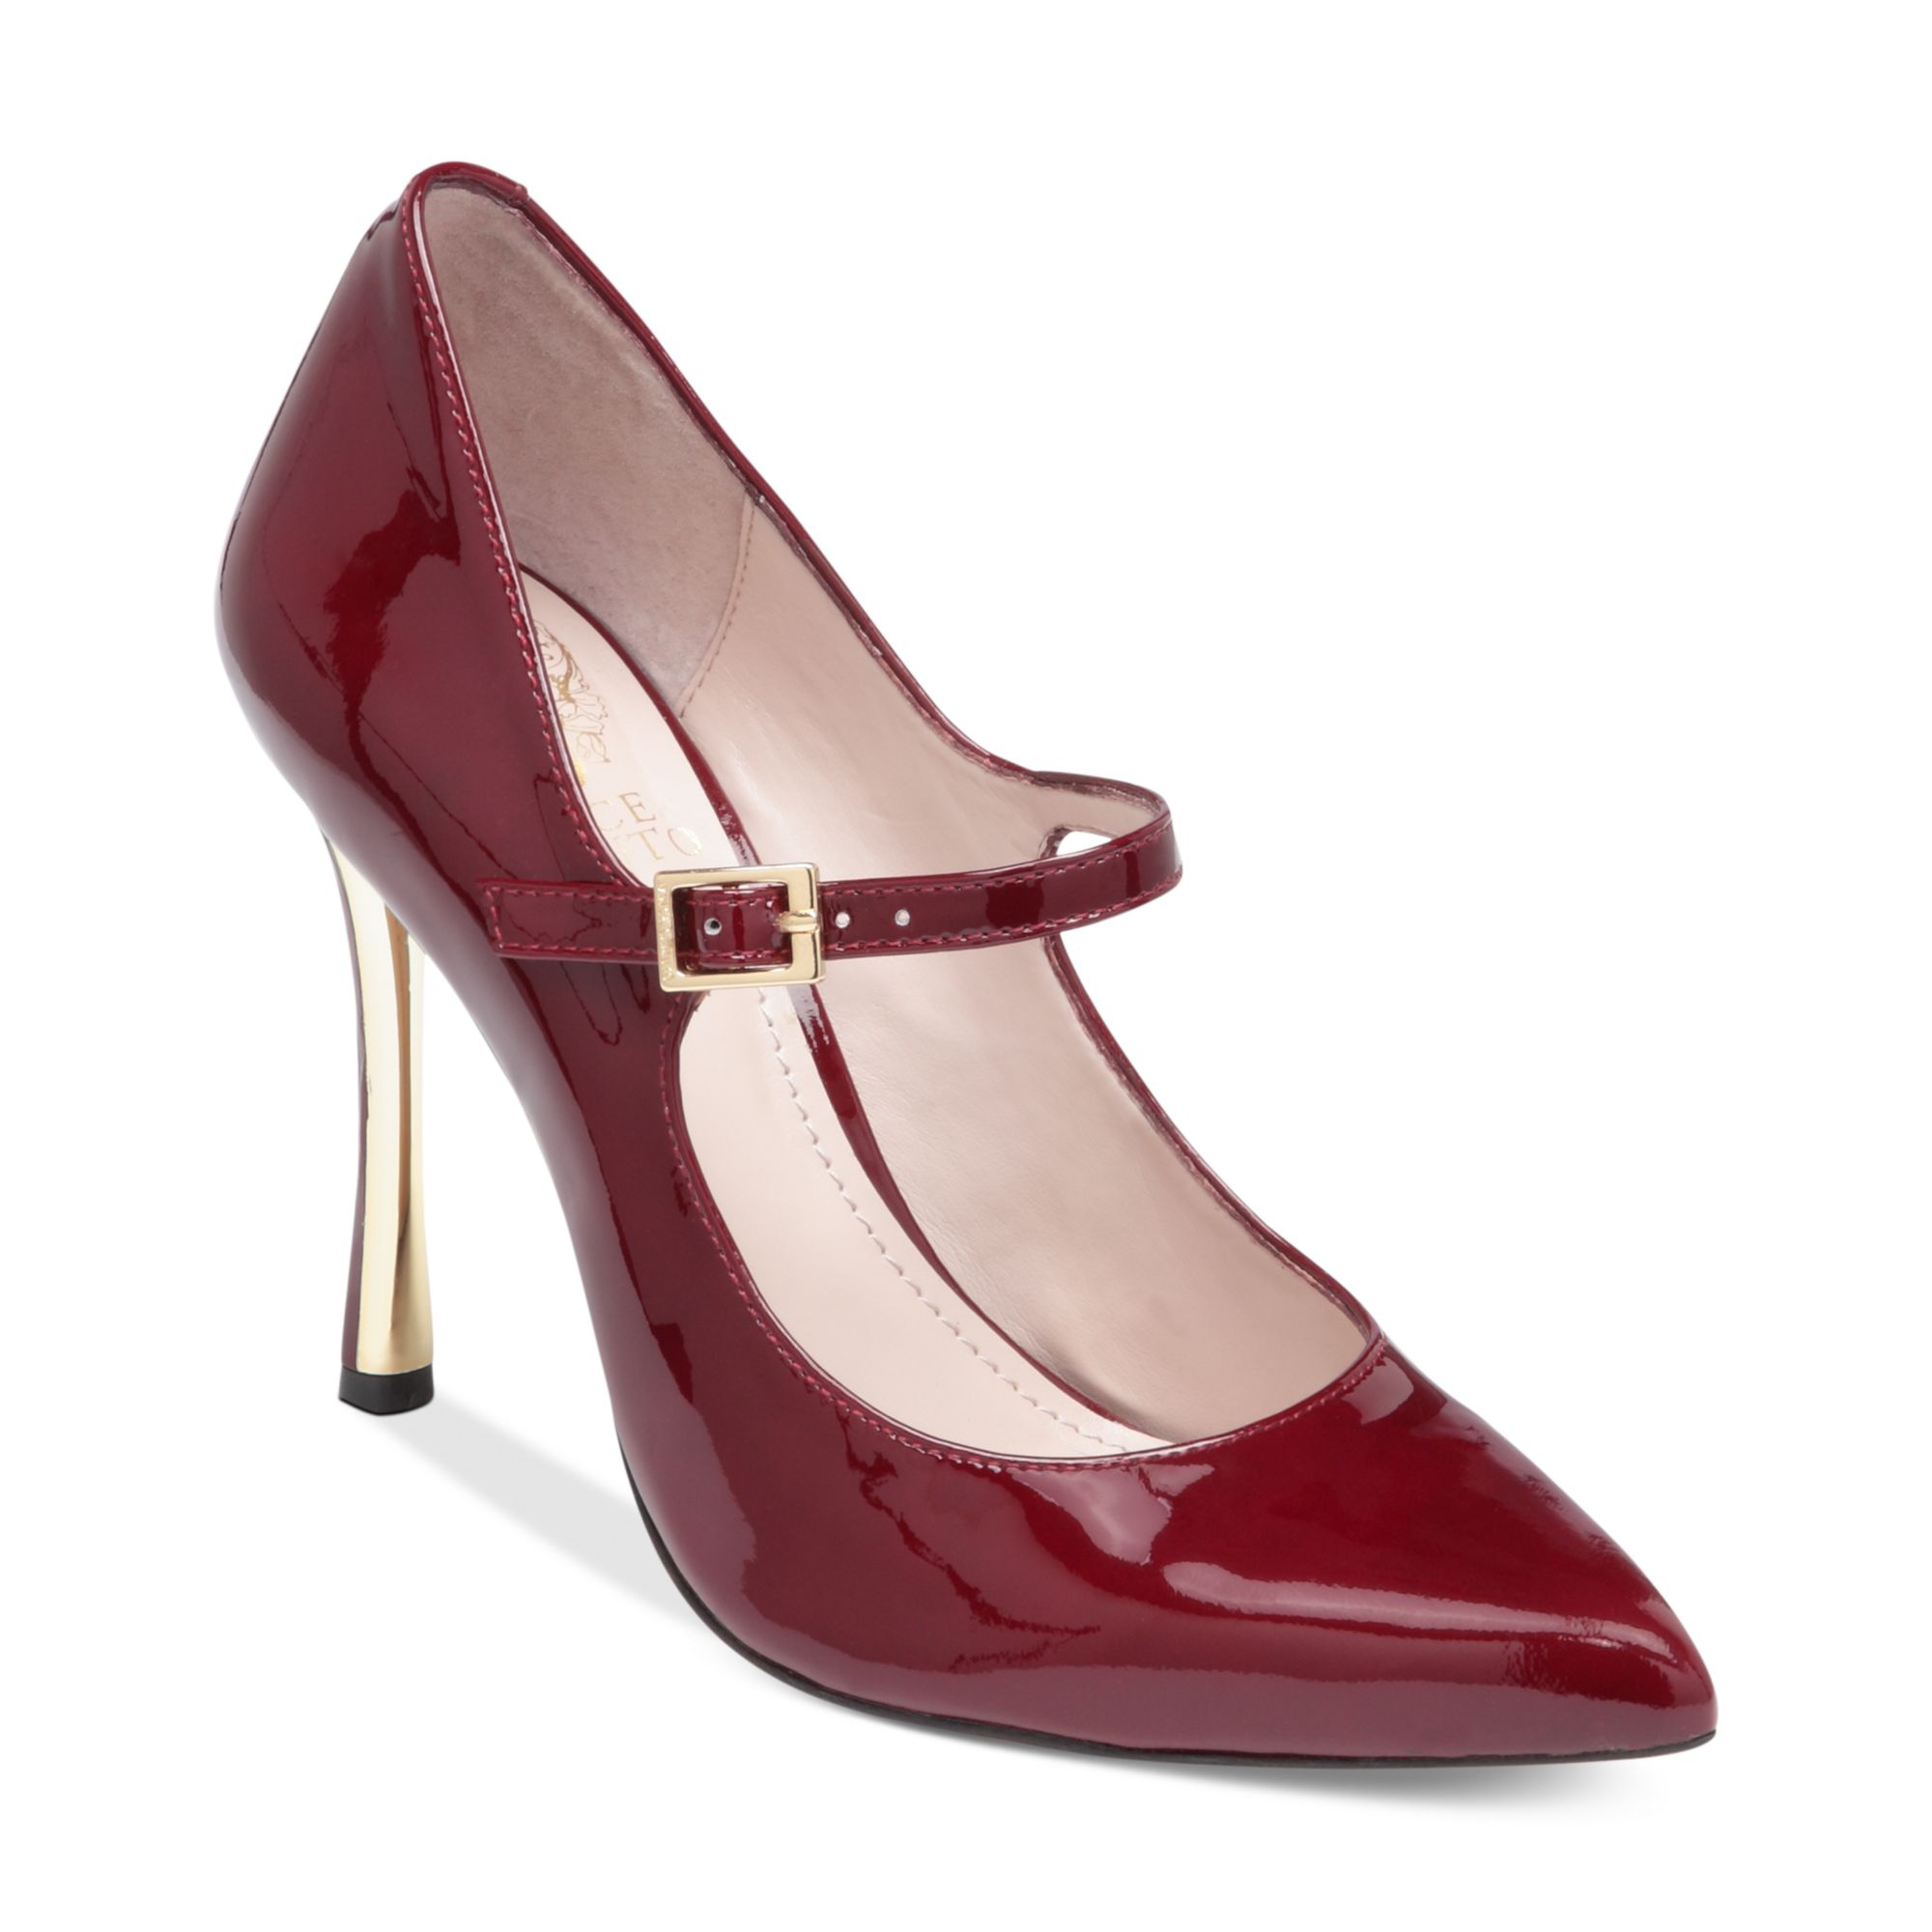 Vince Camuto Callea Mary Jane Pumps in Red (Burgundy) | Lyst